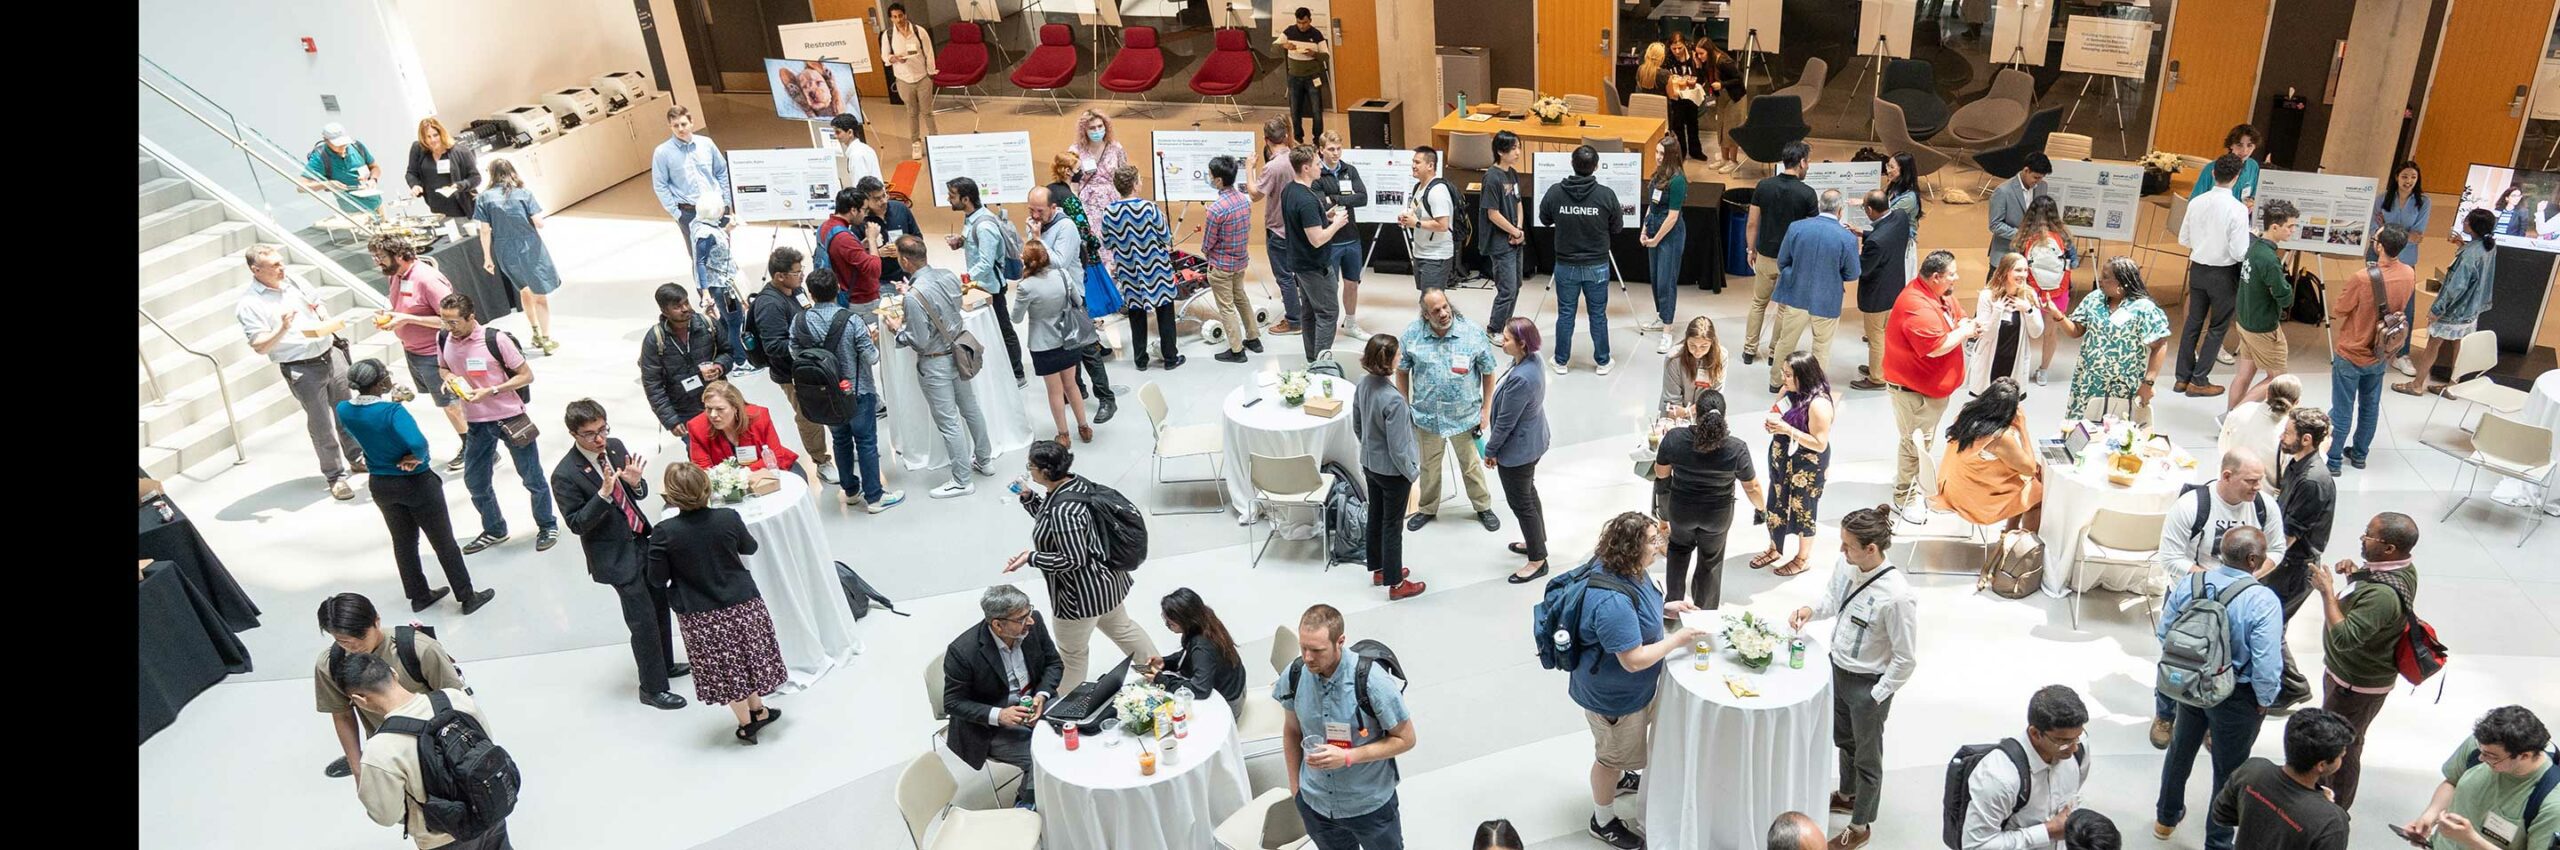 At the Khoury 40th anniversary culmination celebration, guests mingle and discuss research posters in the ISEC atrium